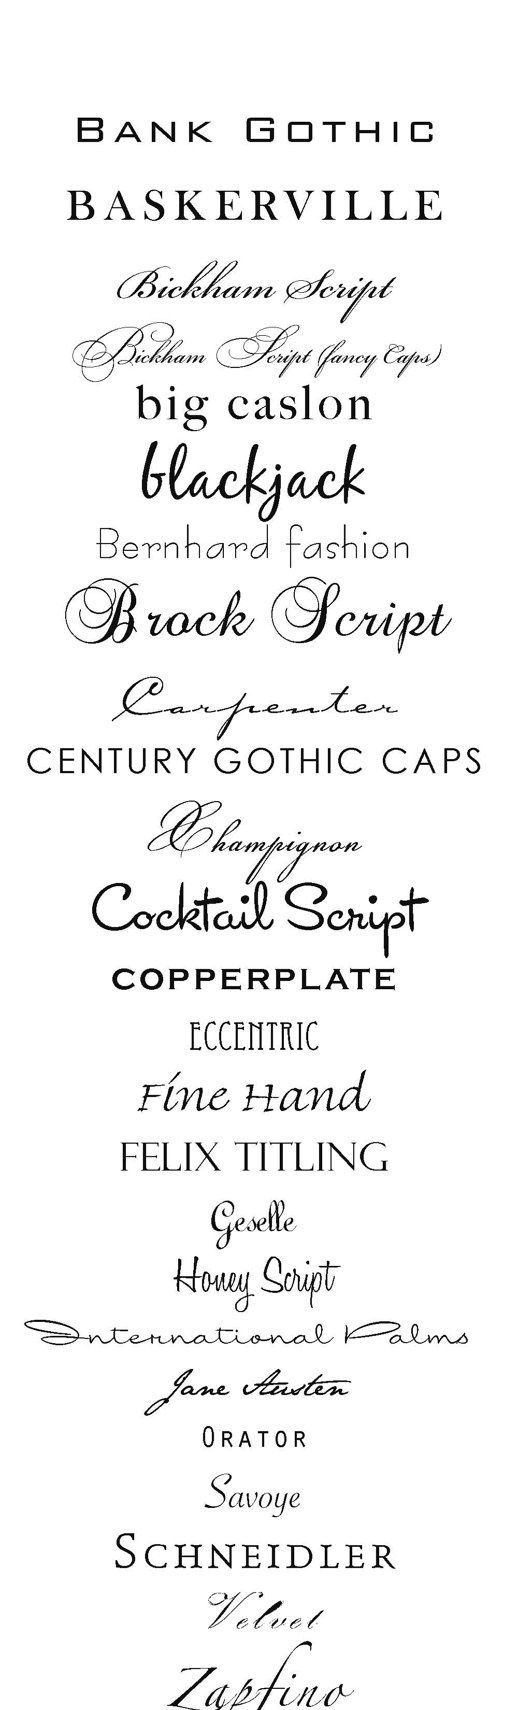 Awesome Fonts. I esp like a few of the ones near the top :)